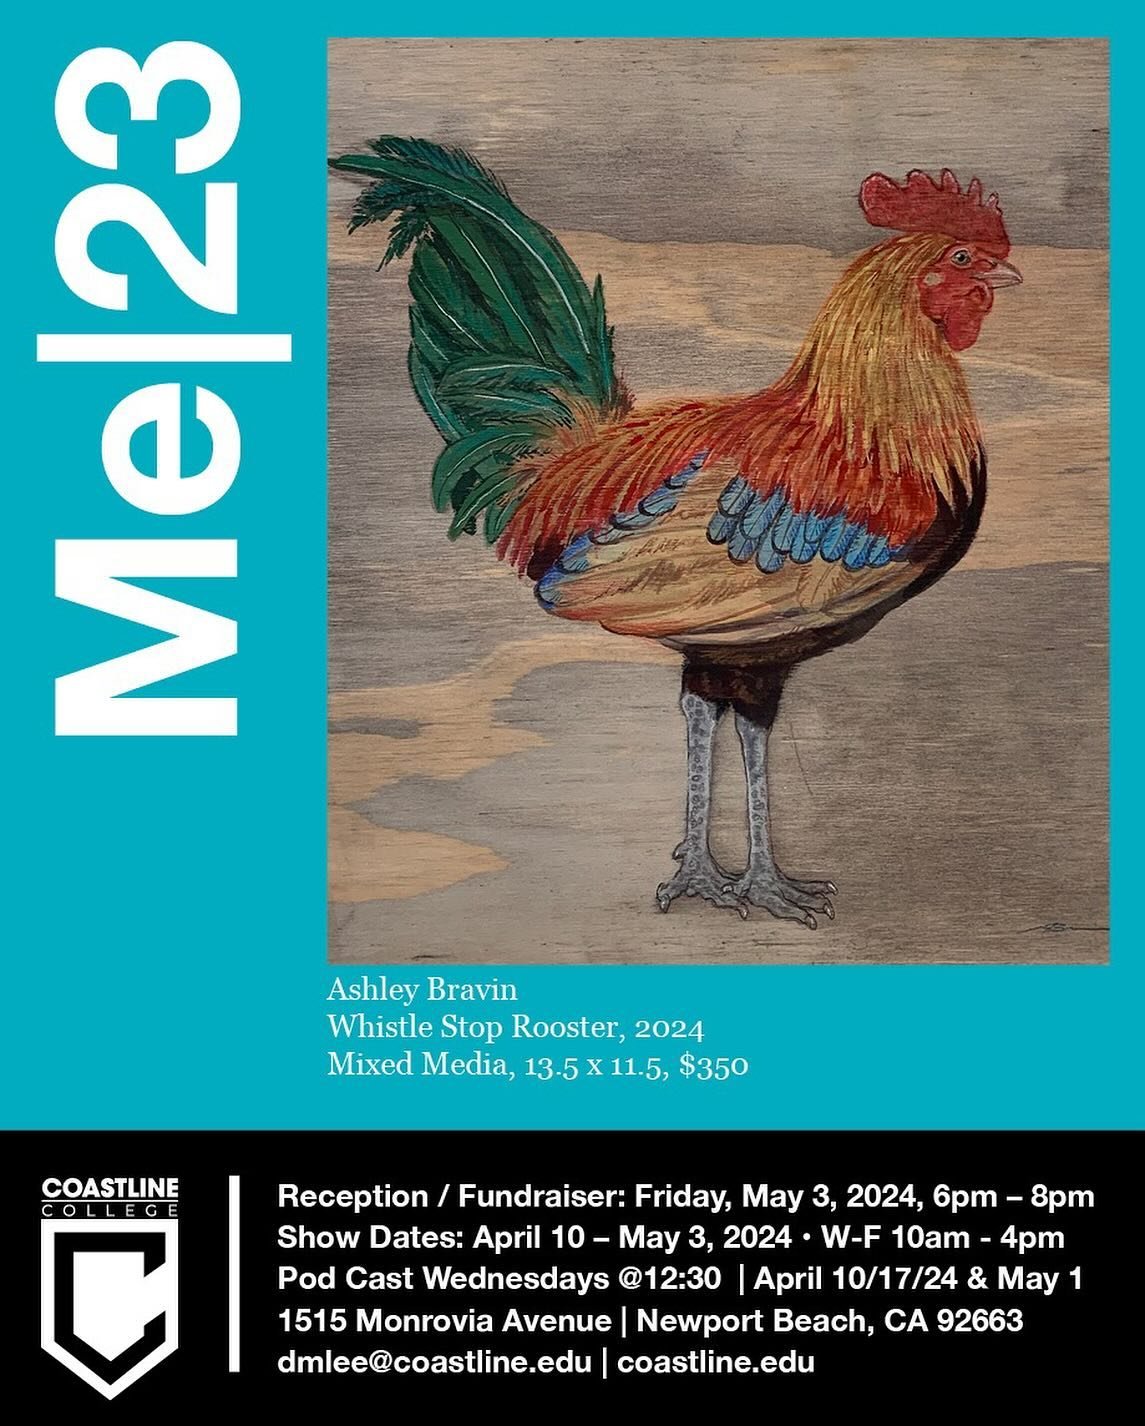 Come on out to the &ldquo;Me|23&rdquo; reception tonight at @coastlineartgallery and come see a huge collection of fabulous artwork by Southern Californian artists. 

From the gallery:
The exhibition title &ldquo;Me|23&rdquo; was inspired by the name